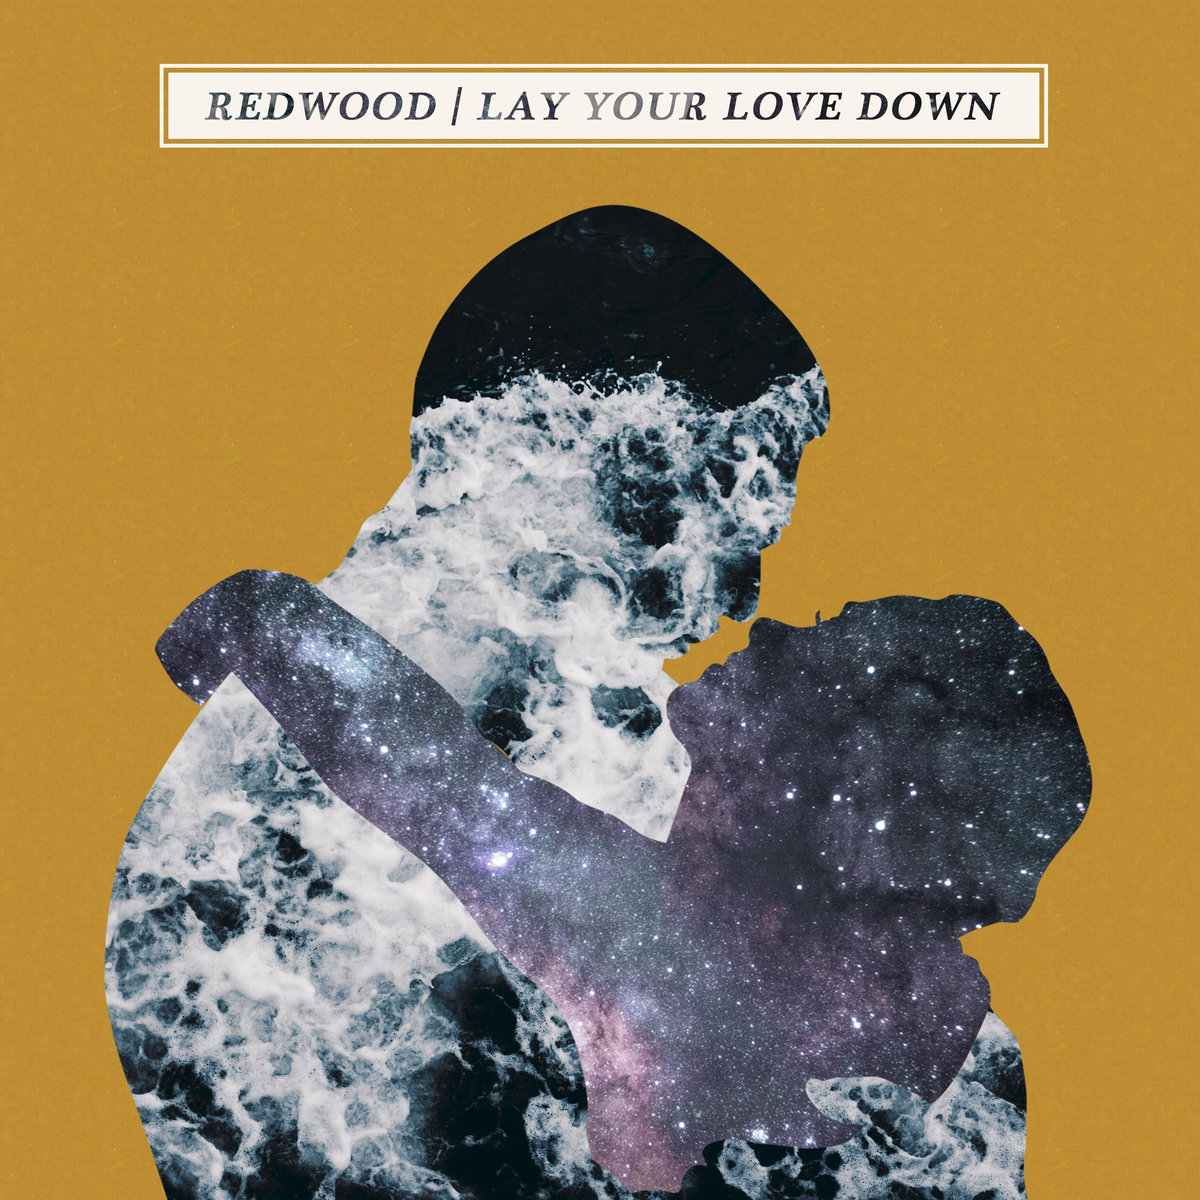 Redwood Lay Your Love Down